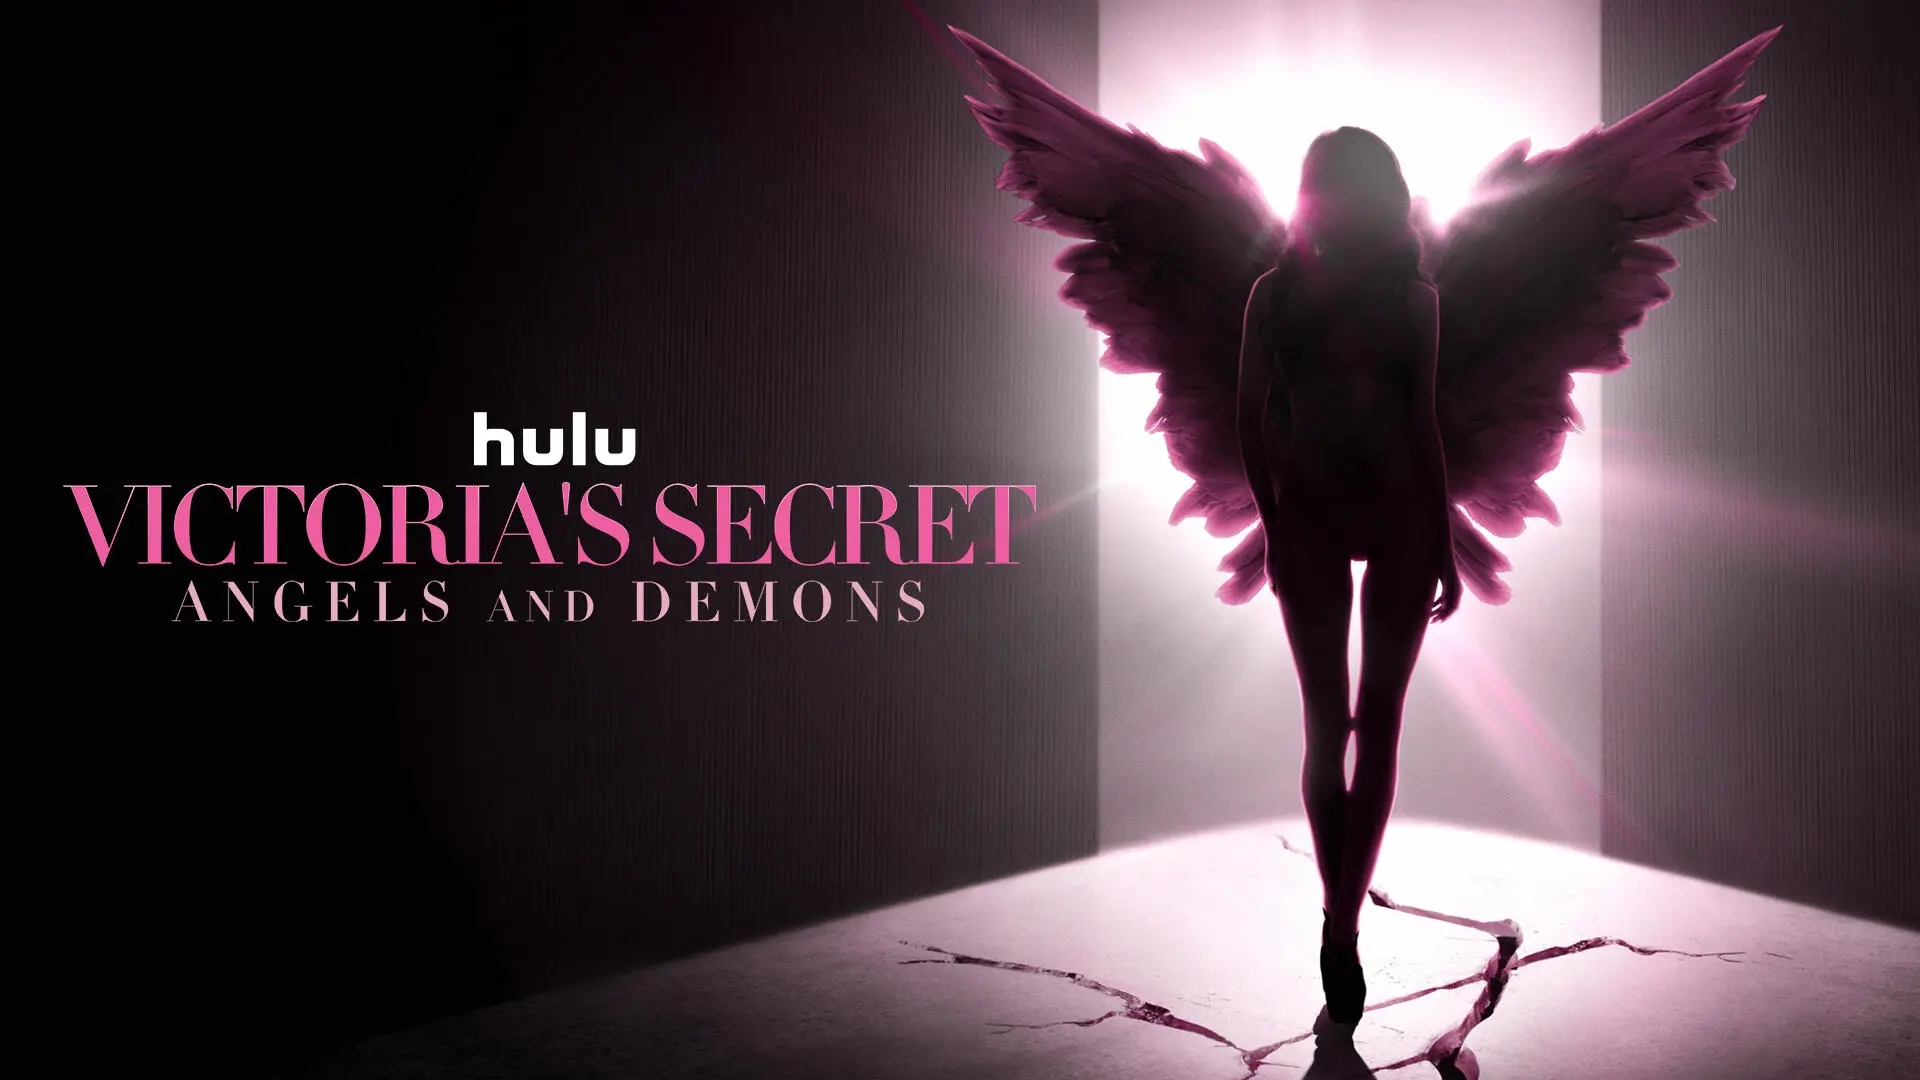 Title art for the documentary Victoria's Secret: Angels and Demons